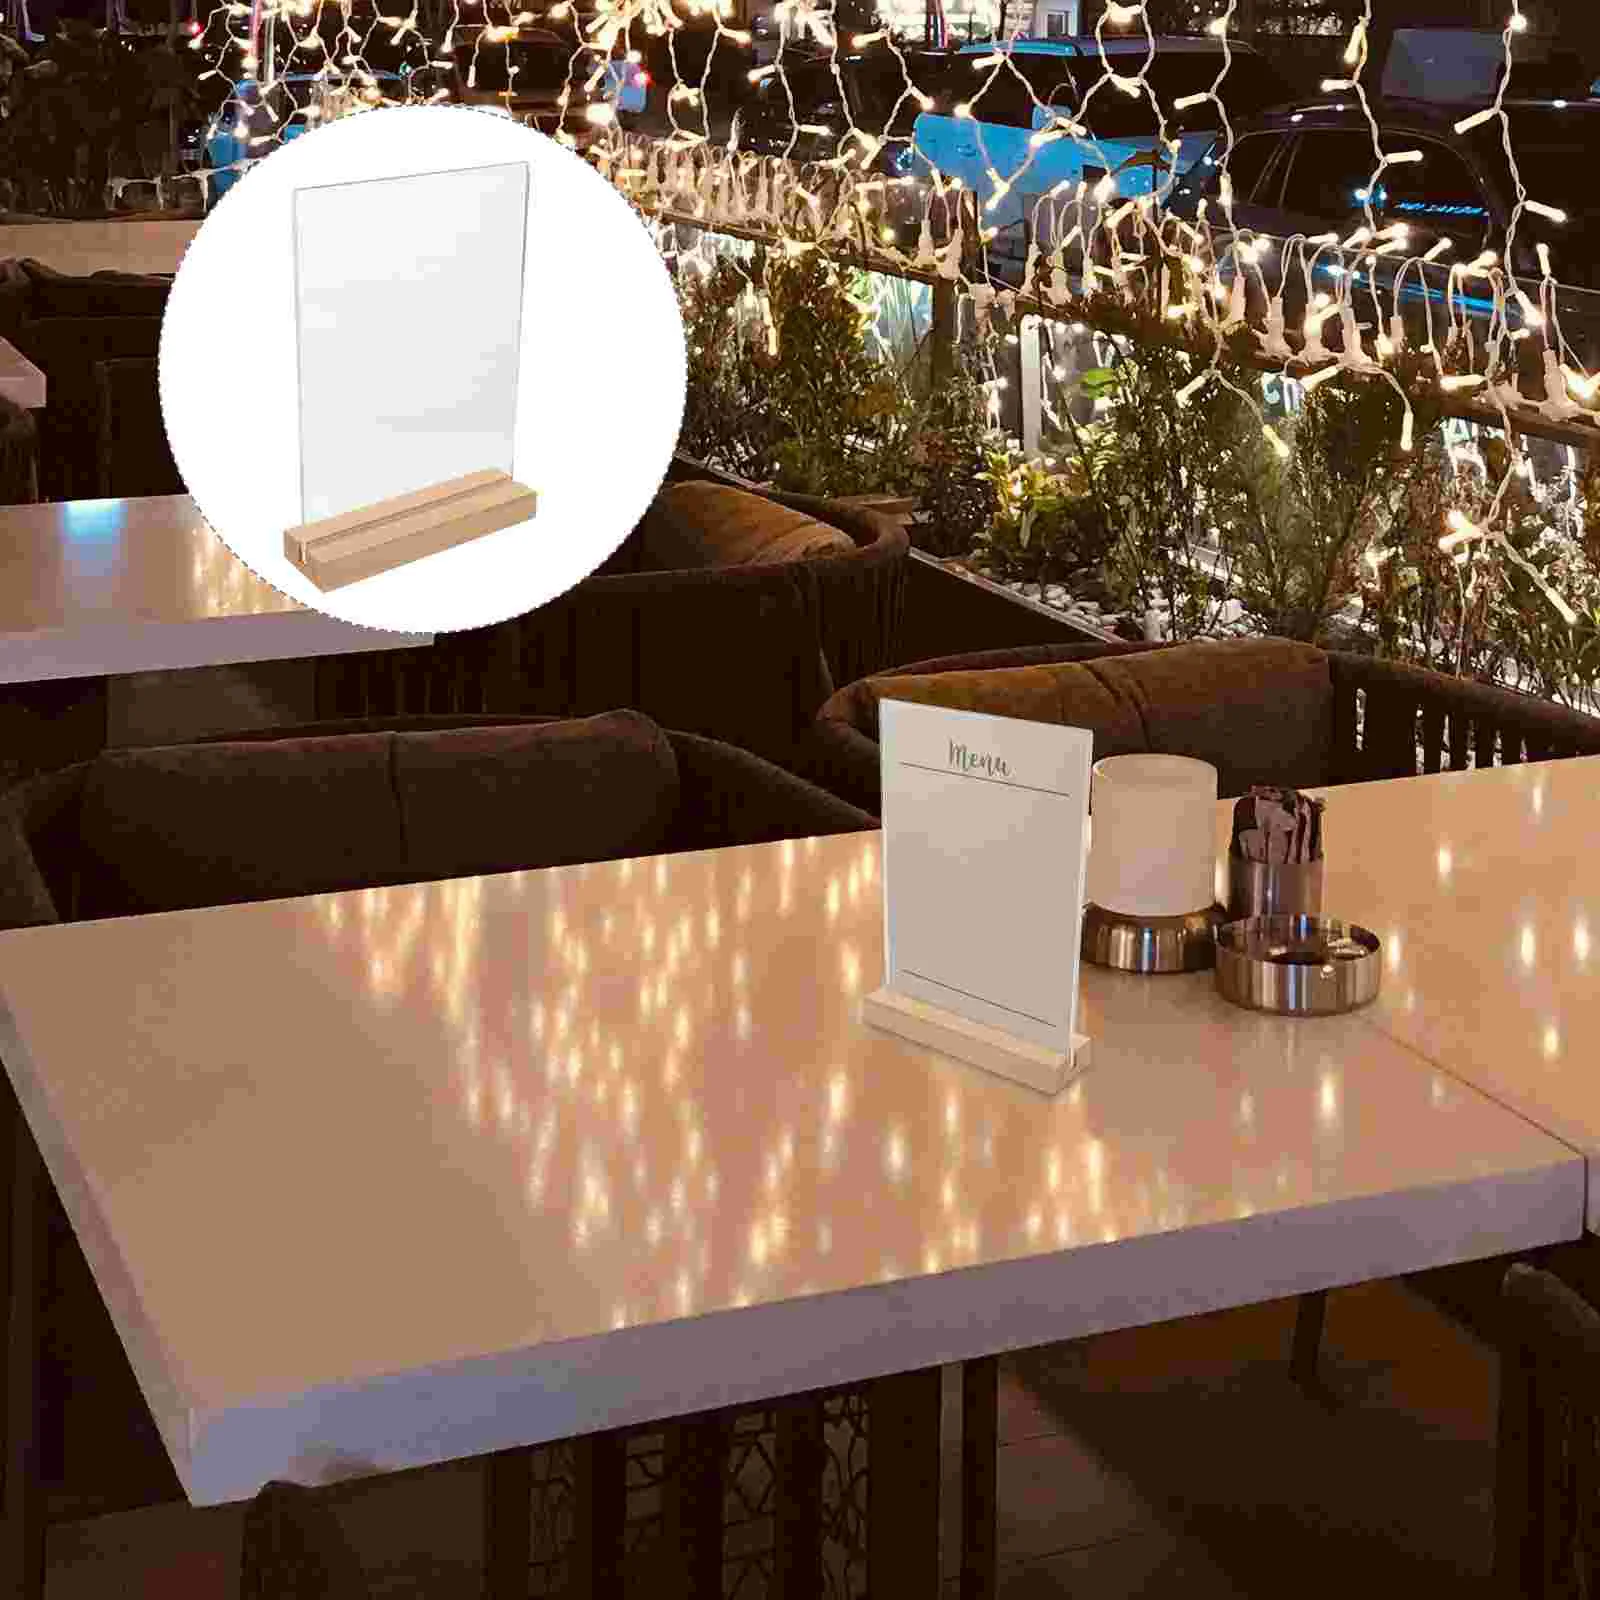 Clear Menu Display Stand Desktop Poster Holder Acrylic Sign Holder for Restaurants with Wood Base acrylic stands clear place card holders with card slot table numbers display stands wedding sign holders 12 pieces